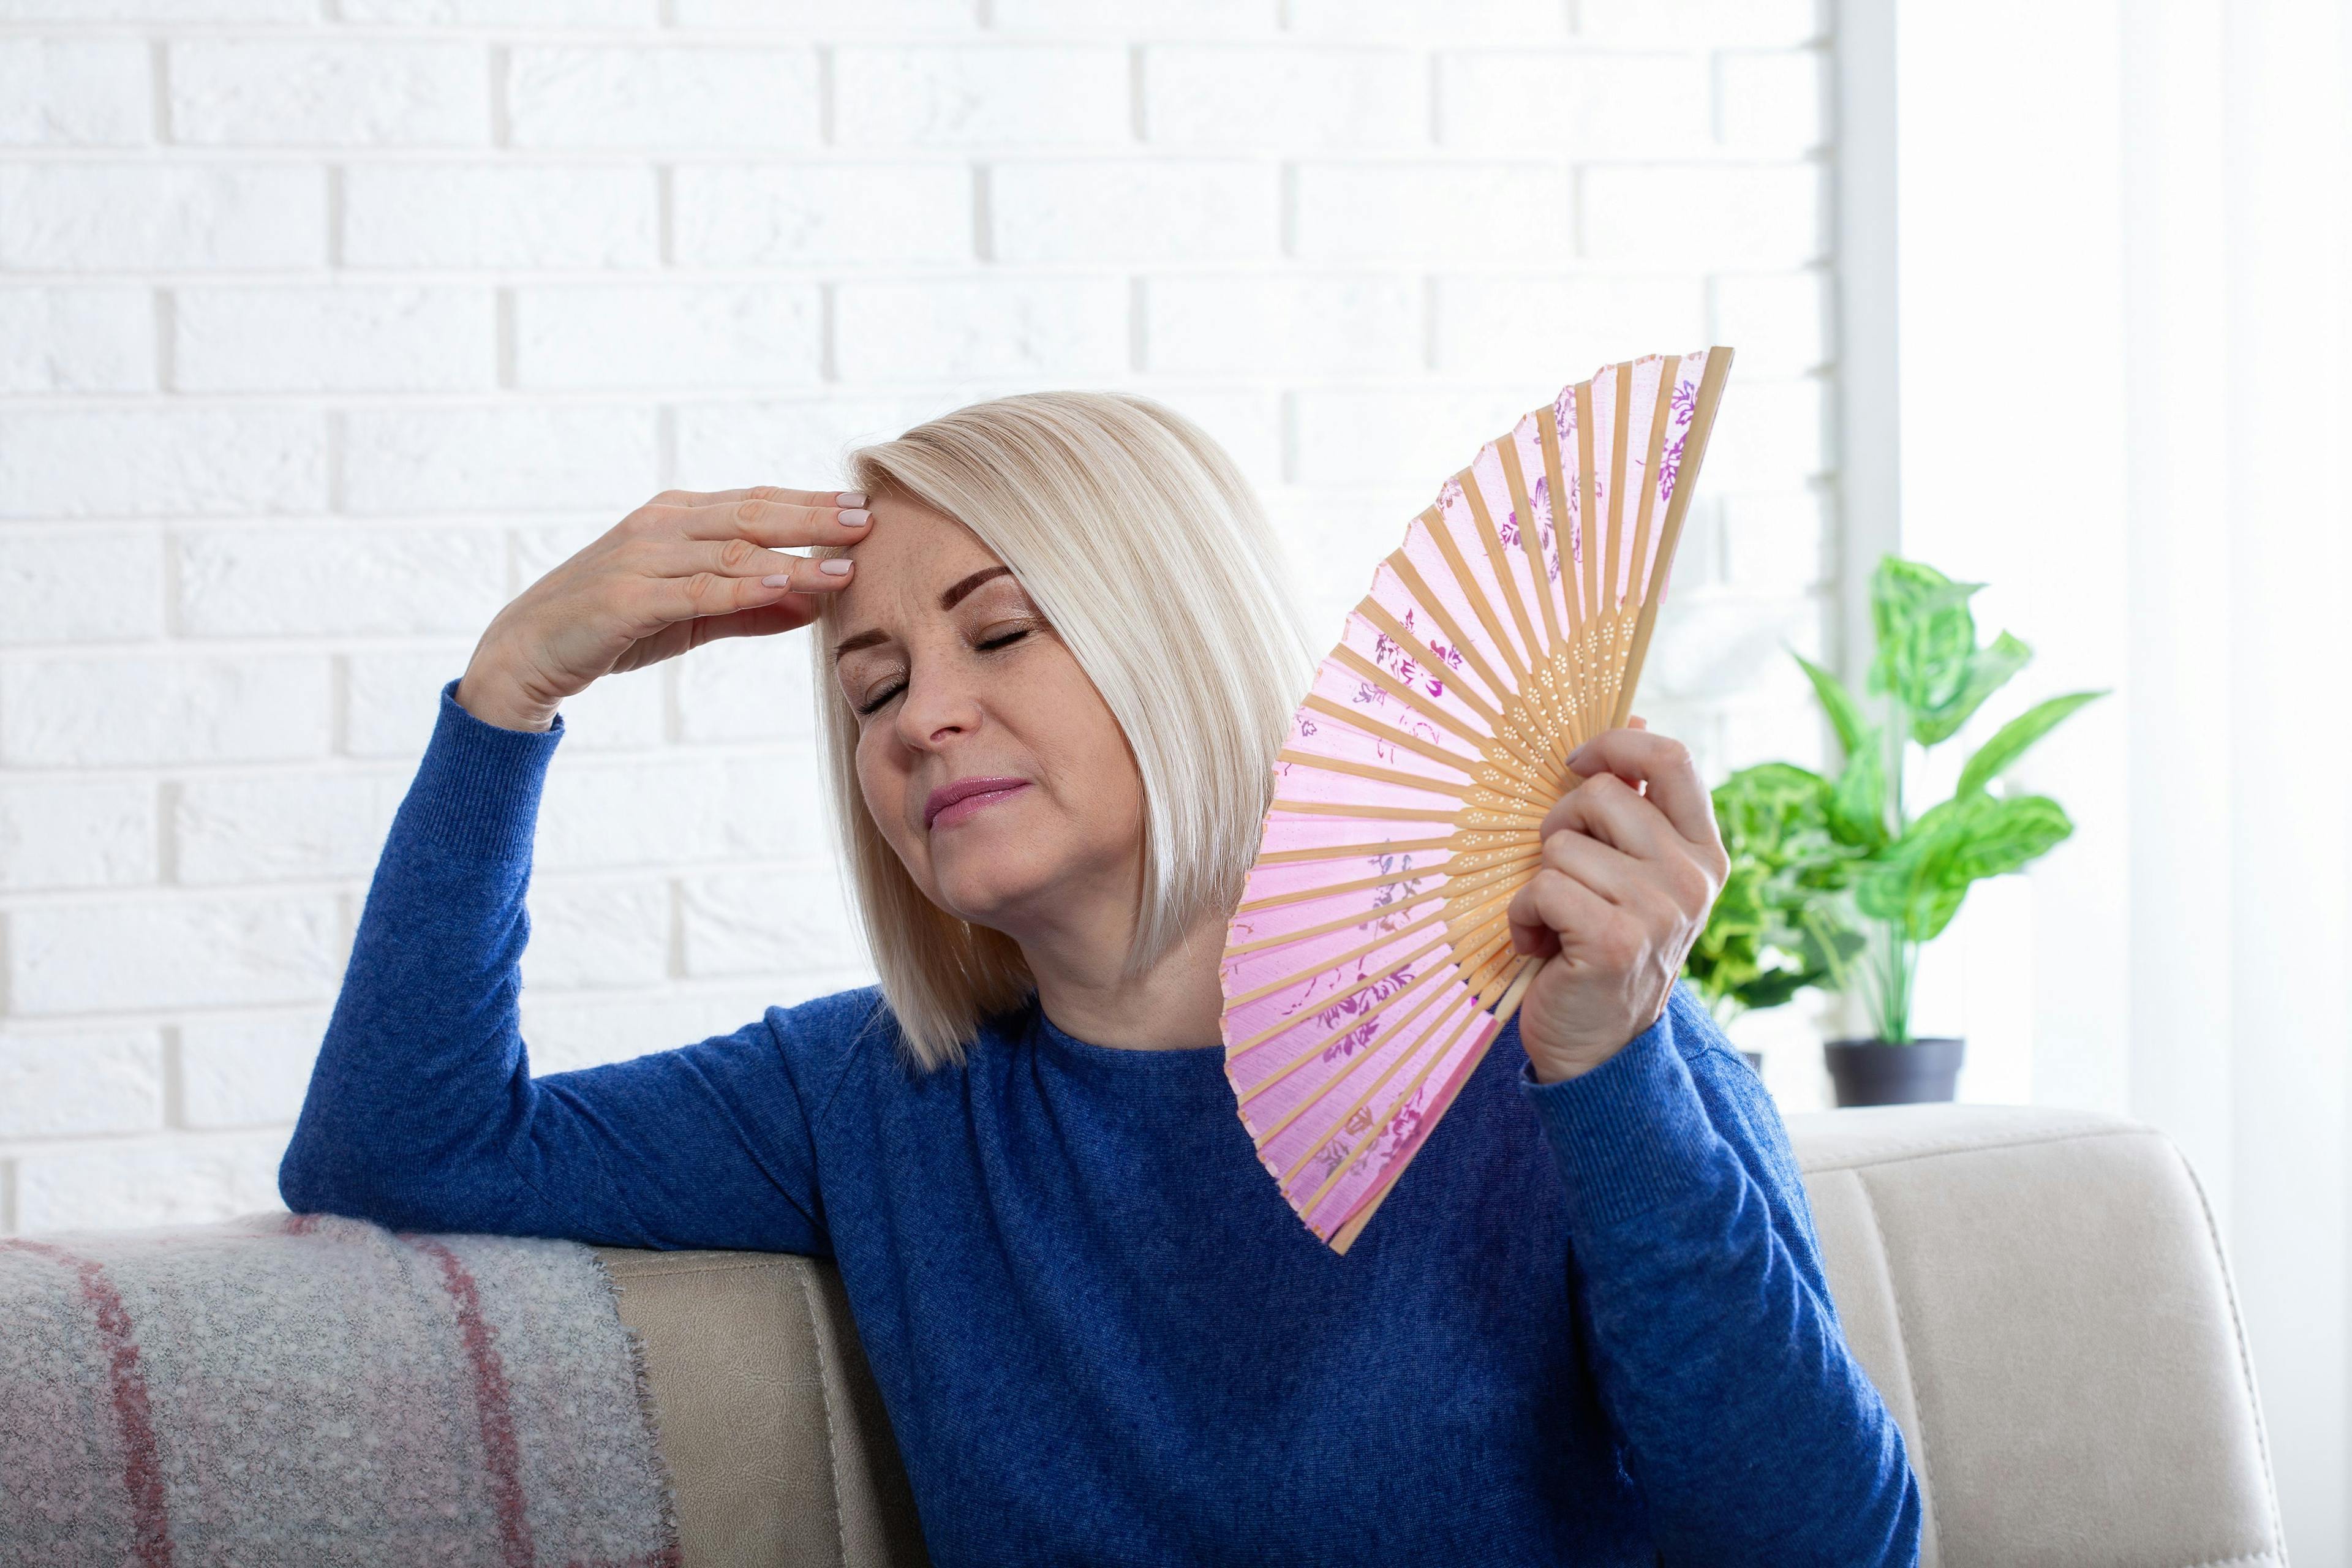 Fezolinetant Appears Successful In Treating Hot Flashes And Night Sweats